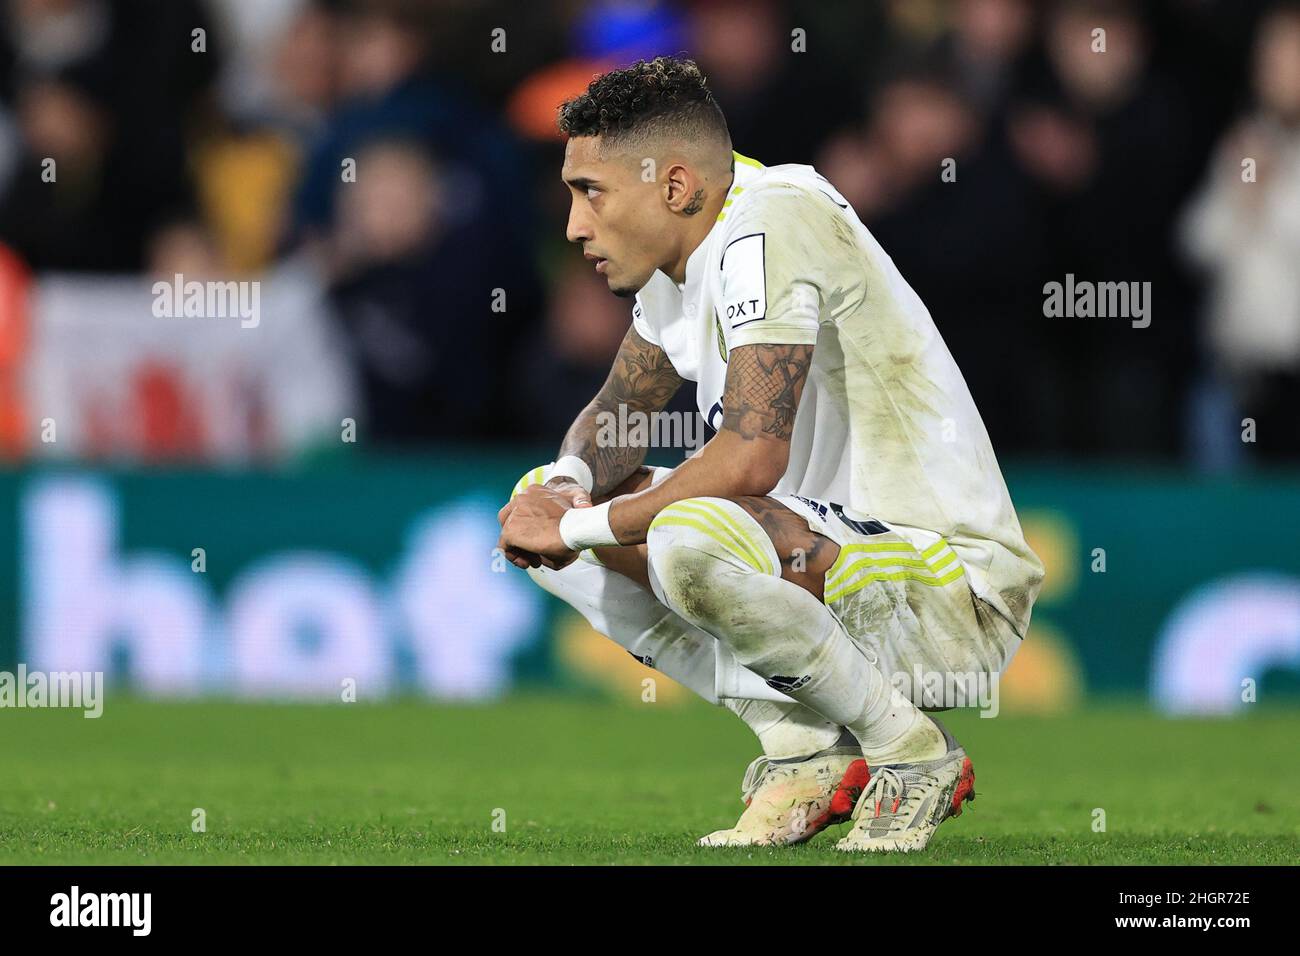 Leeds, UK. 22nd Jan, 2022. Raphinha #10 of Leeds United looks dejected after the 0-1 loss during the Premier League fixture Leeds United vs Newcastle United at Elland Road, Leeds, UK, 22nd January 2022 Credit: News Images /Alamy Live News Stock Photo